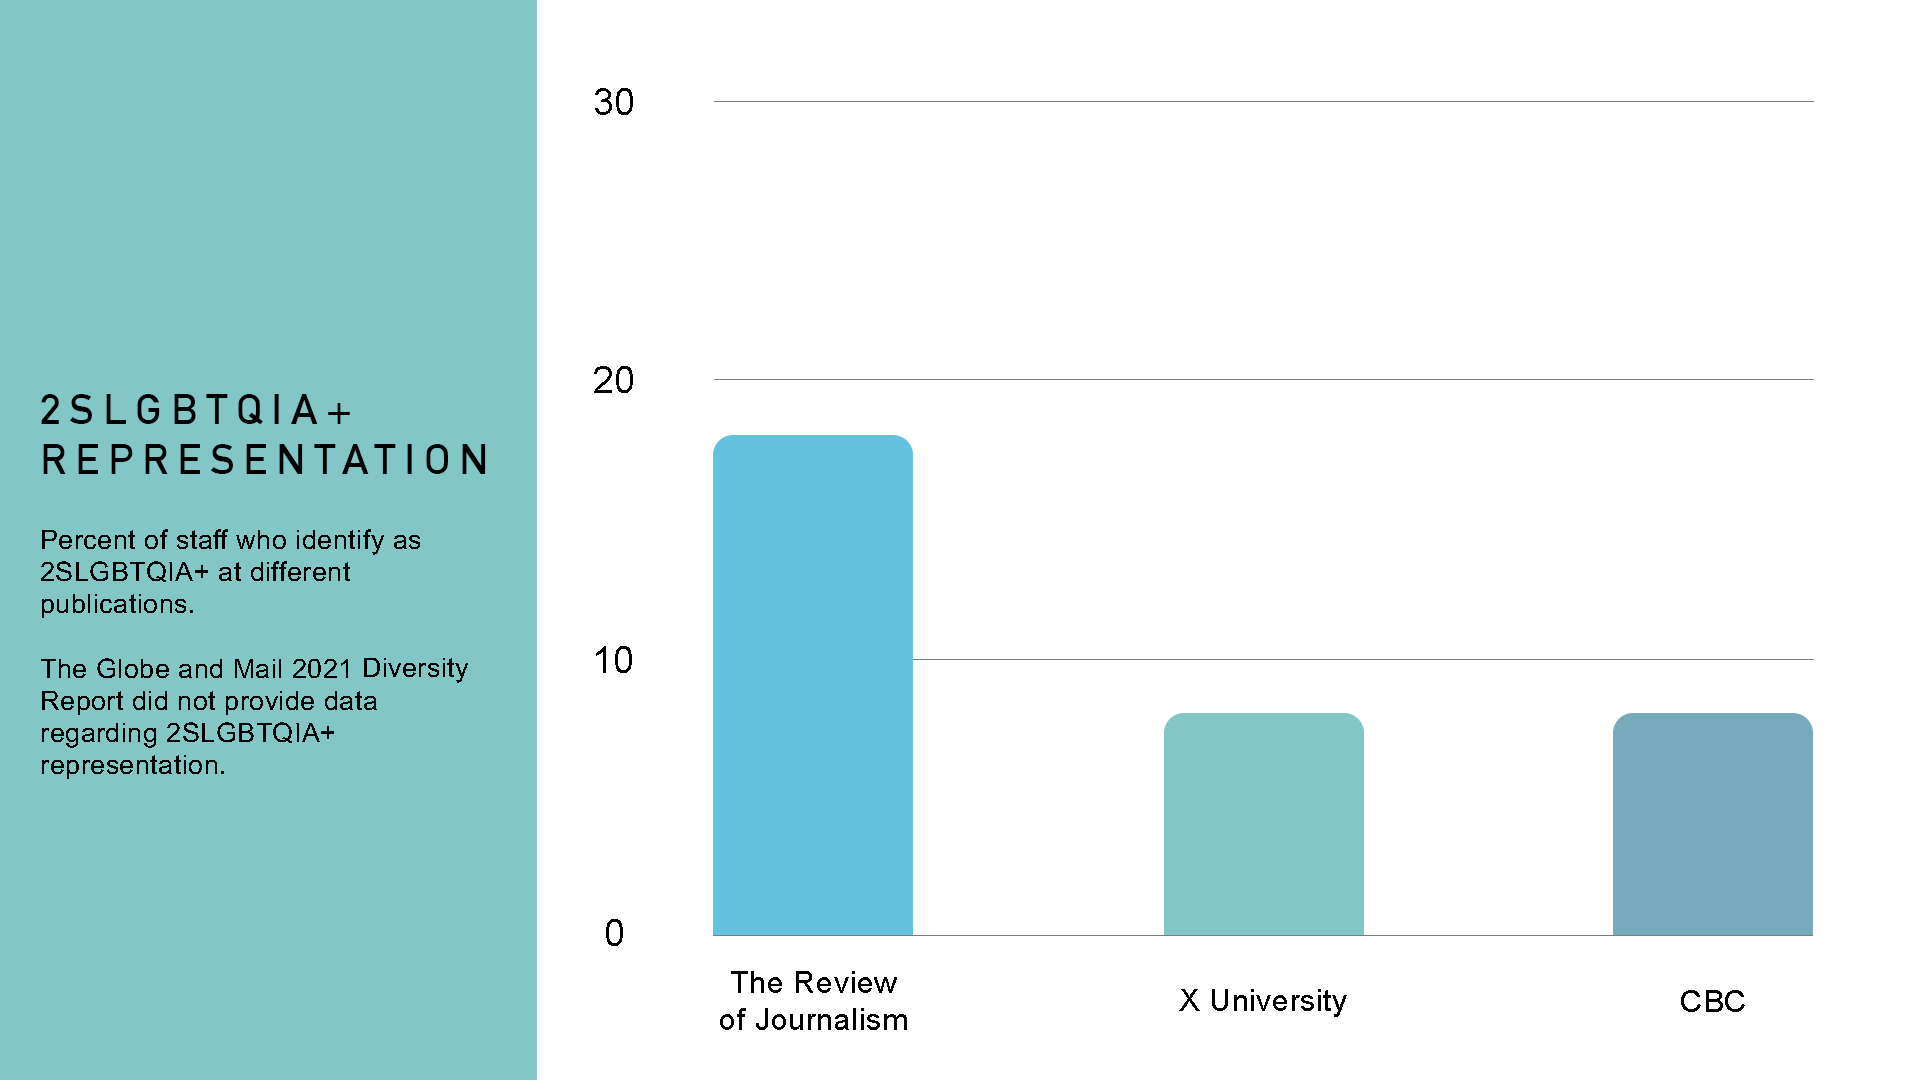 a bar graph representing the percentage of 2SLGBTQIA+ individuals at The Review of Journalism, X University, and CBC/Radio Canada.